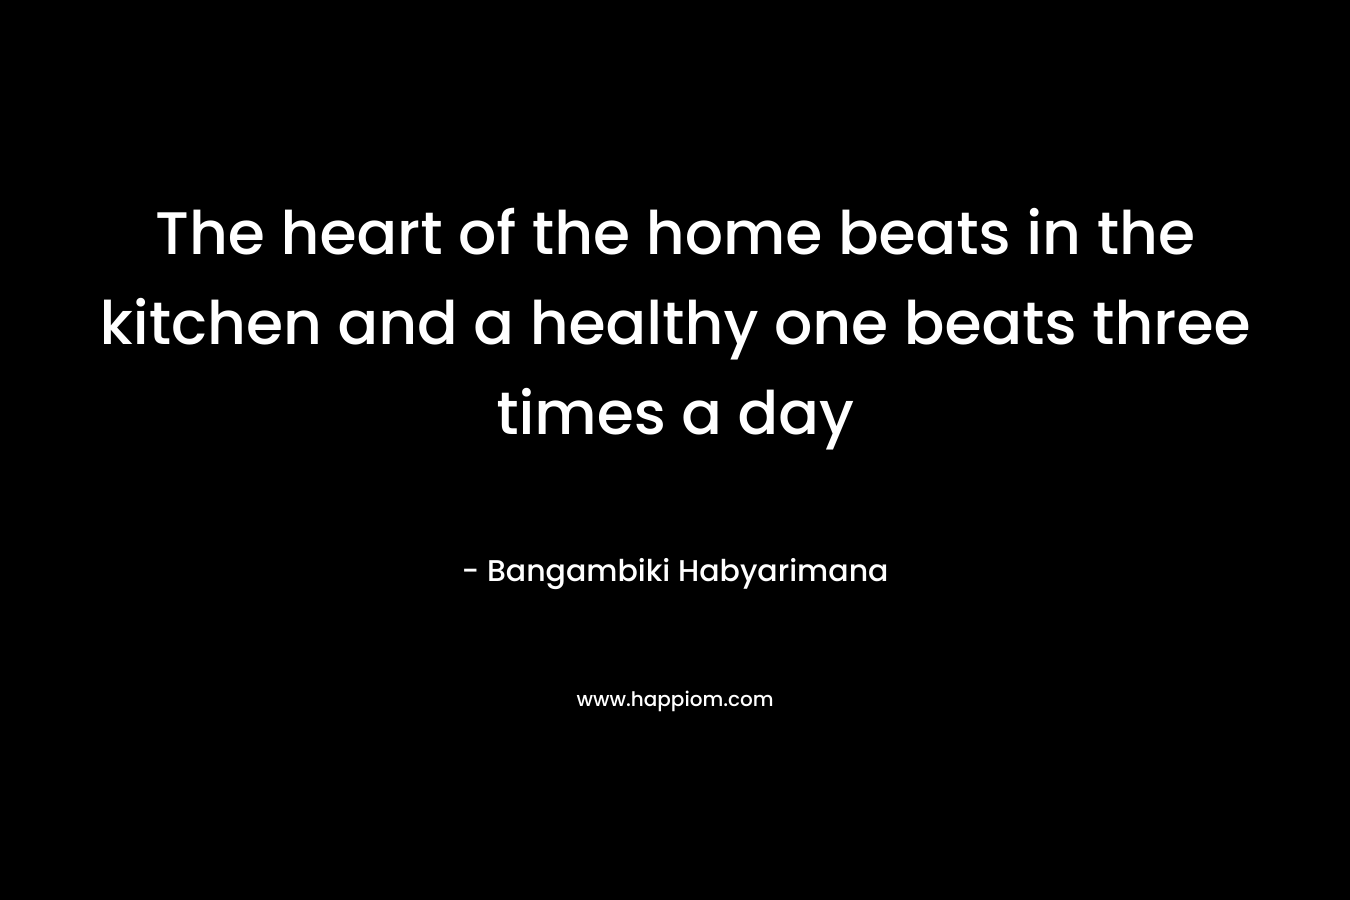 The heart of the home beats in the kitchen and a healthy one beats three times a day